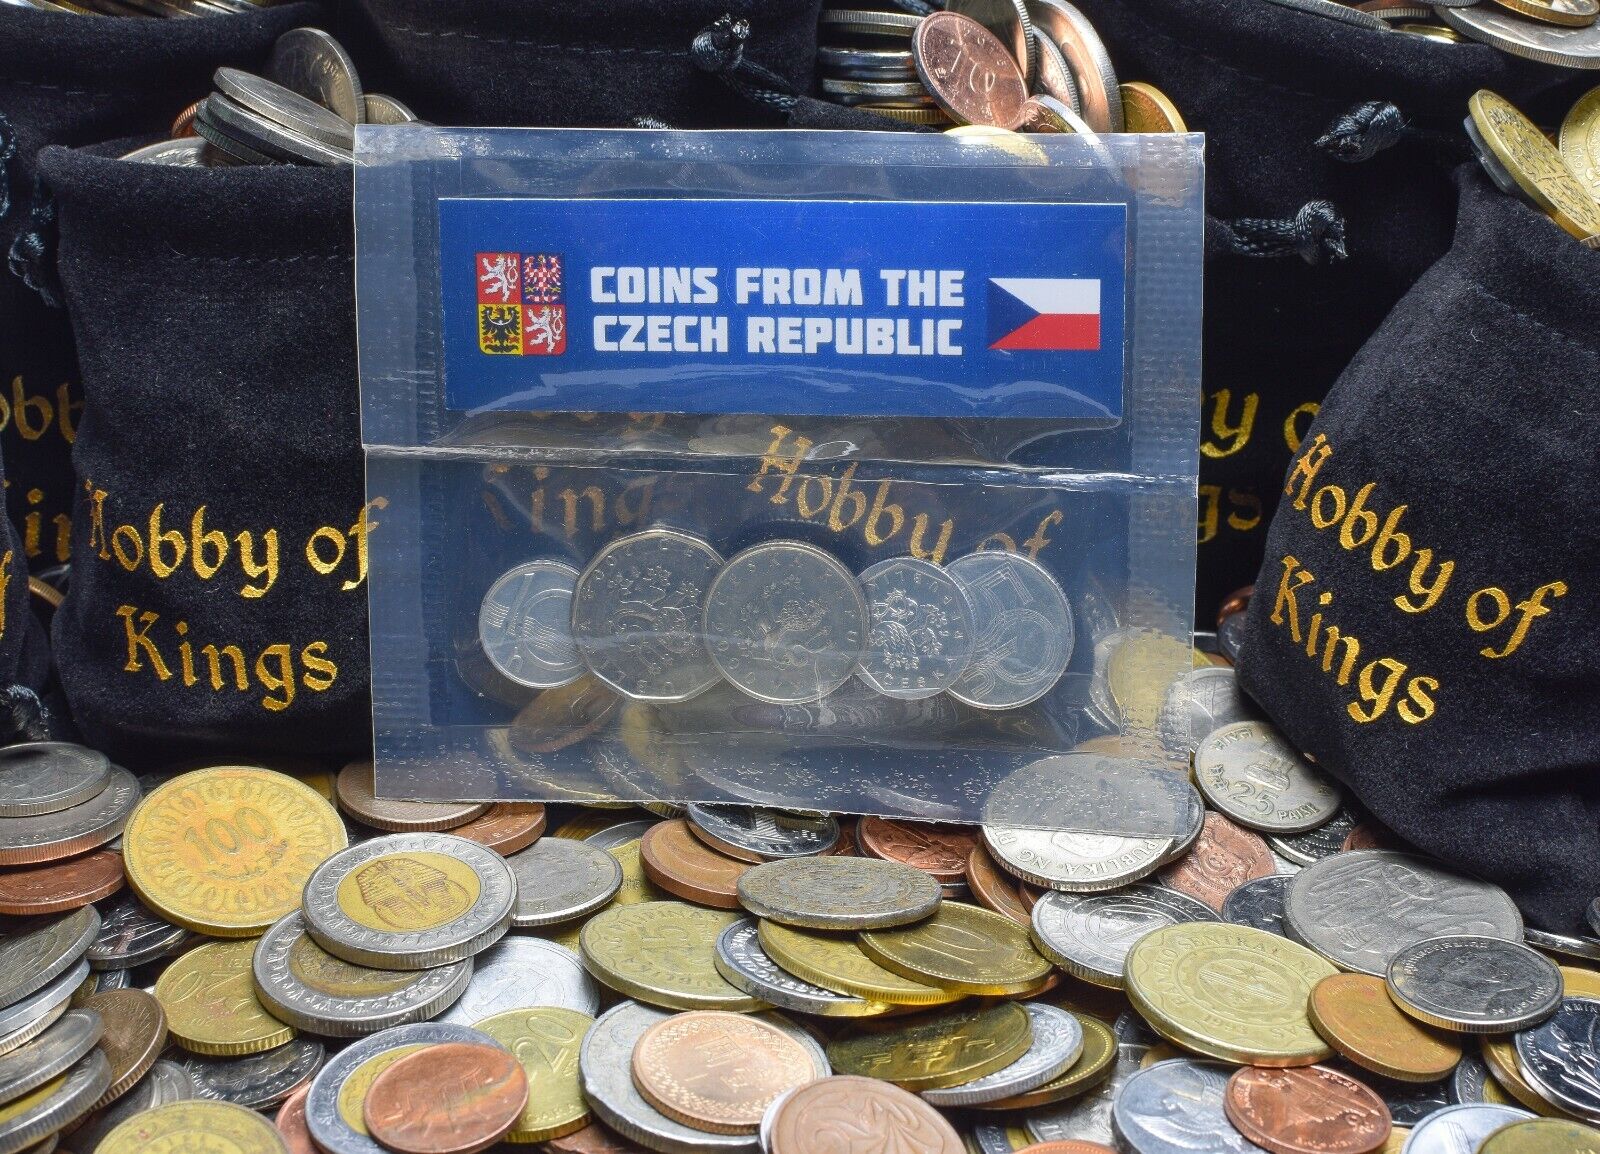 5 CZECH COINS DIFFERENT EUROPEAN COINS FOREIGN CURRENCY, VALUABLE MONEY Без бренда - фотография #3